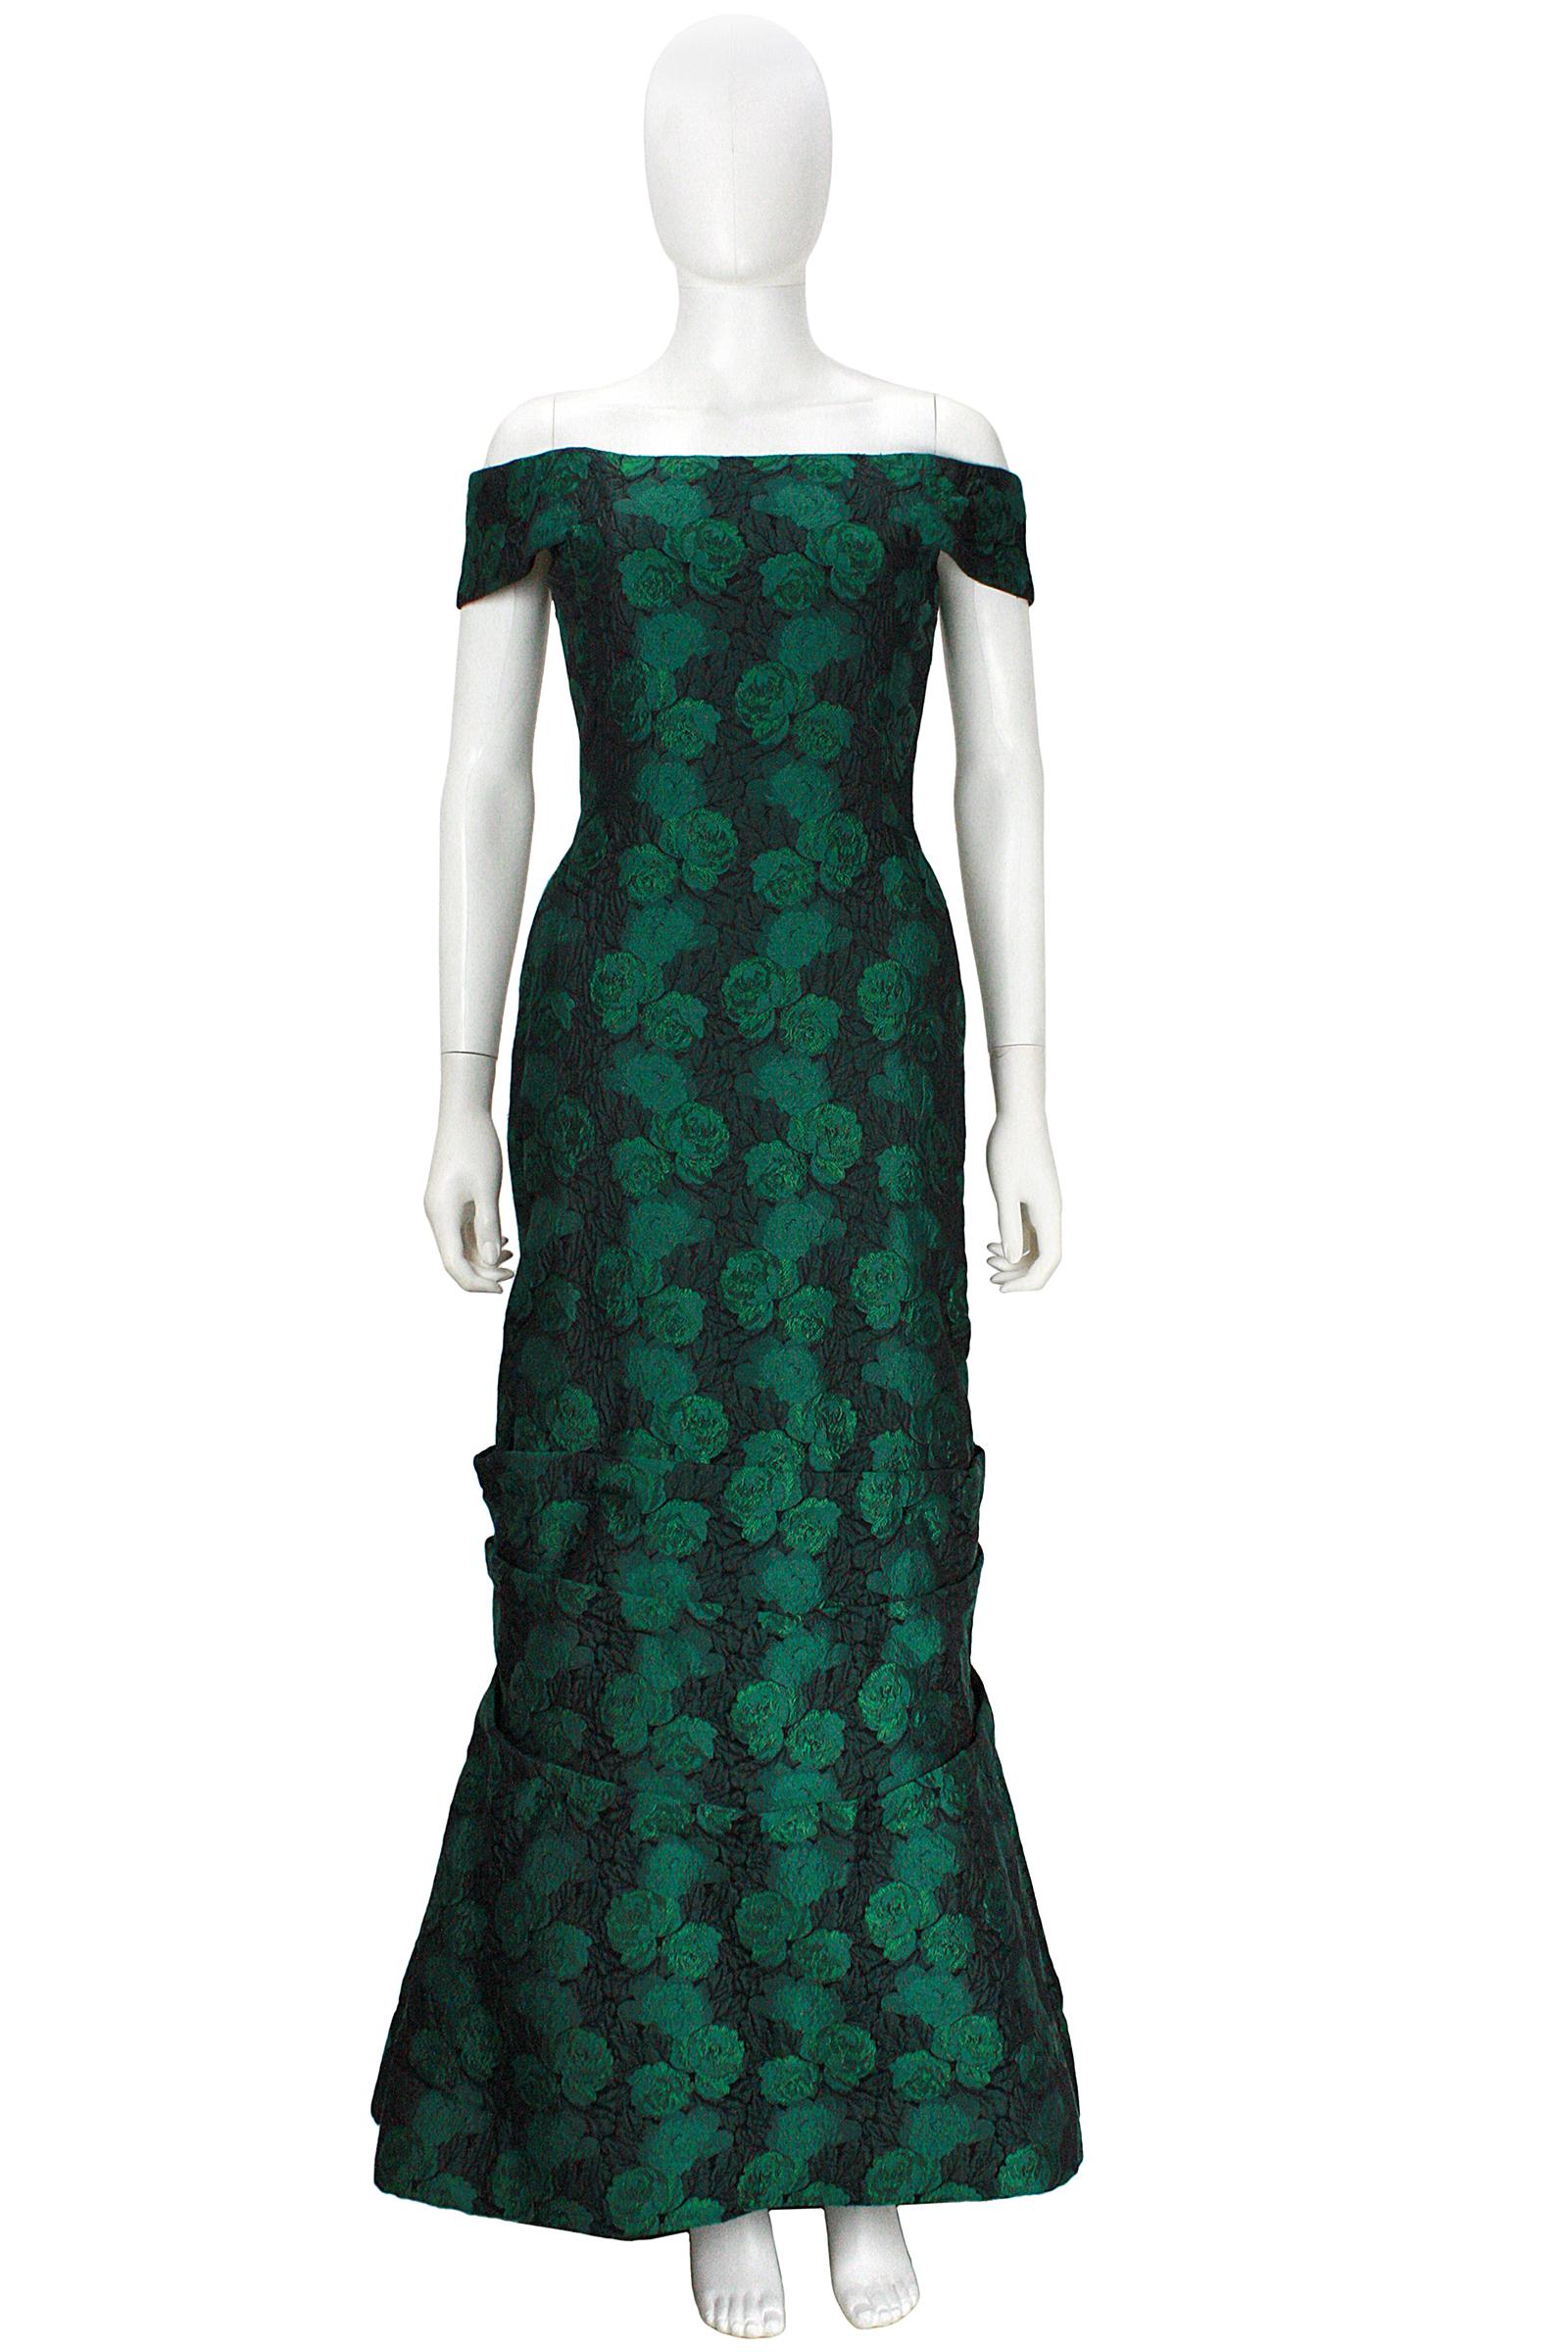 1980s Scaasi Off The Shoulder Green & Black Floral Brocade Gown with Jacket In Good Condition For Sale In Los Angeles, CA